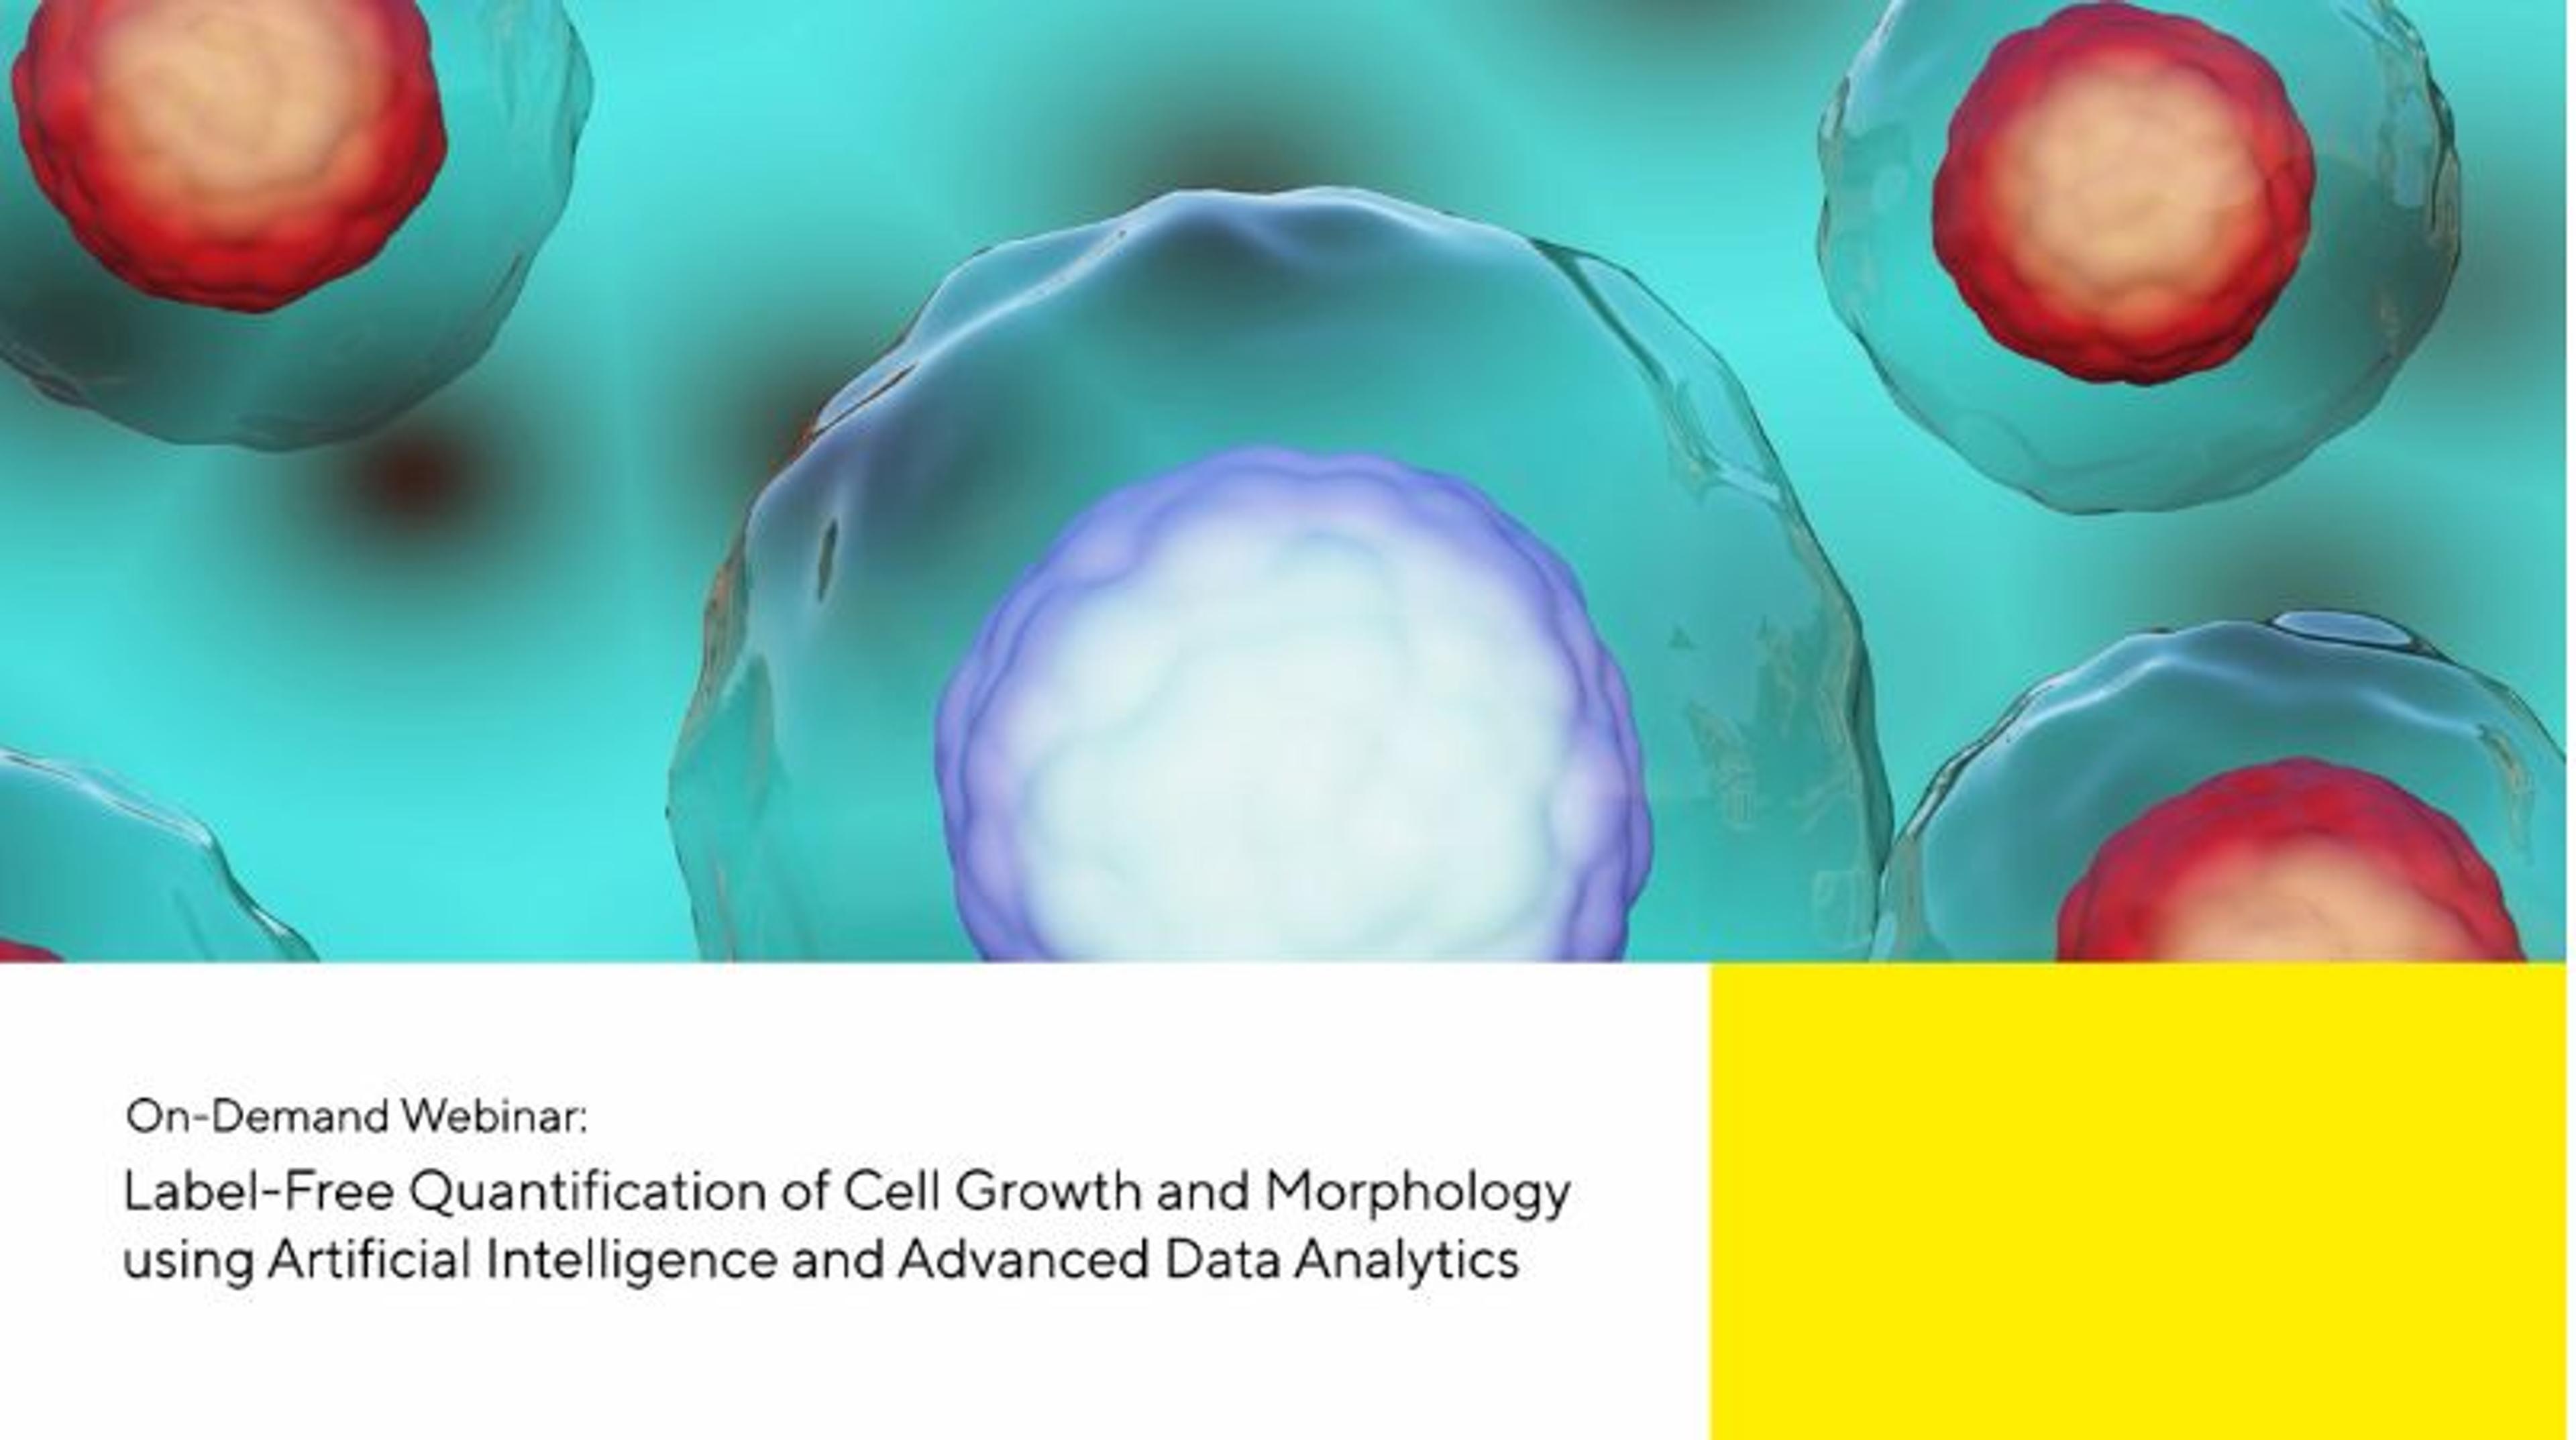 Label-free quantification of cell growth and morphology